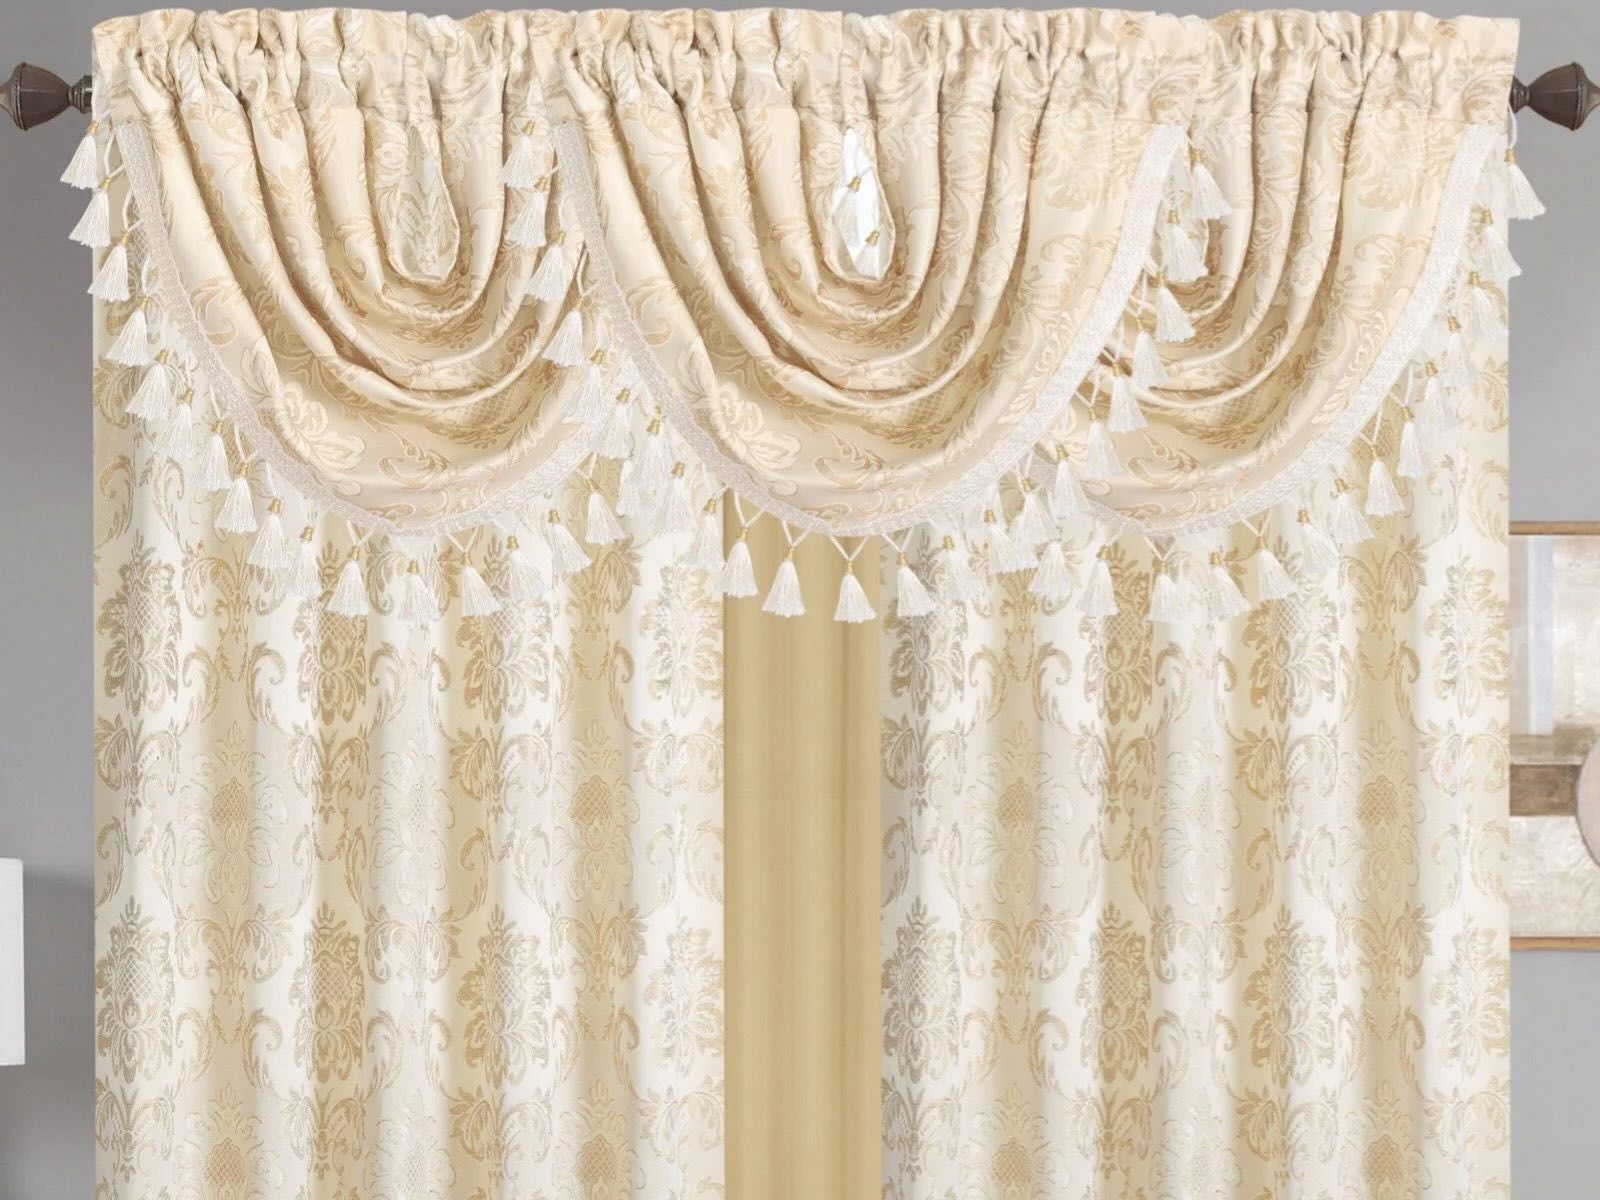 How To Make Waterfall Valances